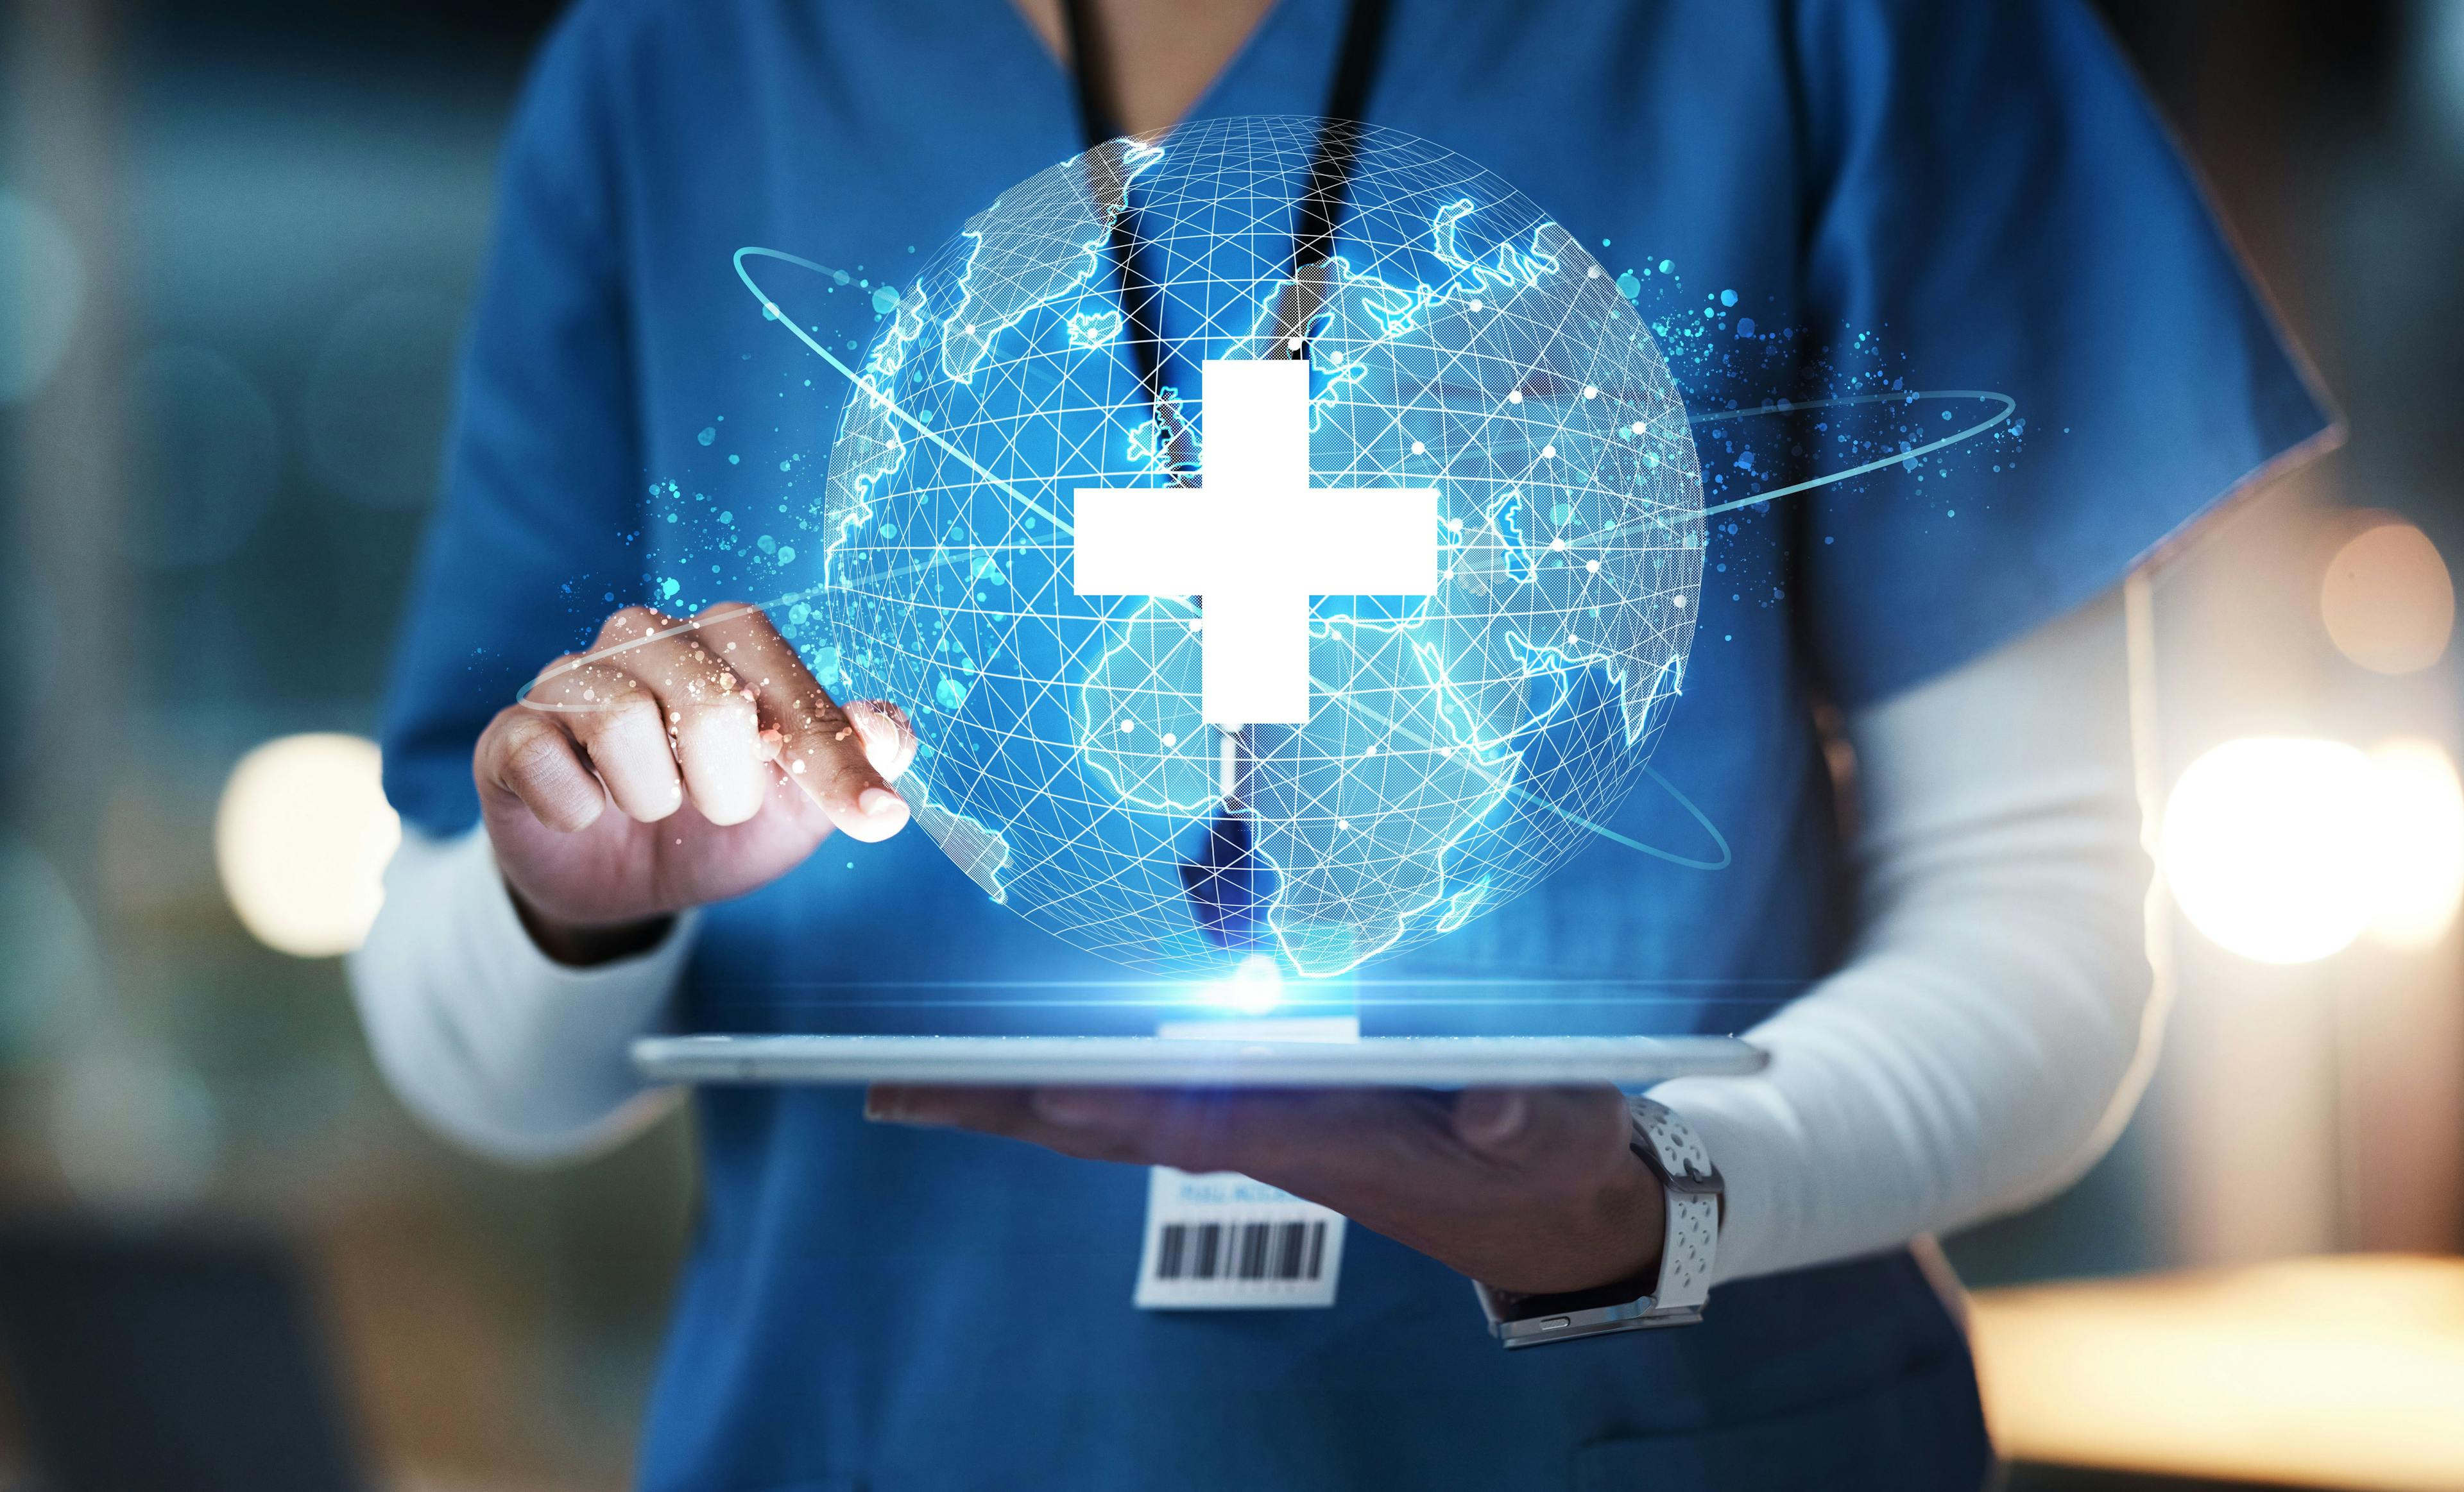 Nurse, hands or technology for 3d globe networking, healthcare community or digital help in life insurance support. Zoom, medical or futuristic world for global hospital, woman or doctor on tablet ux | Image credit: C Malambo/peopleimages.com - stock.adobe.com